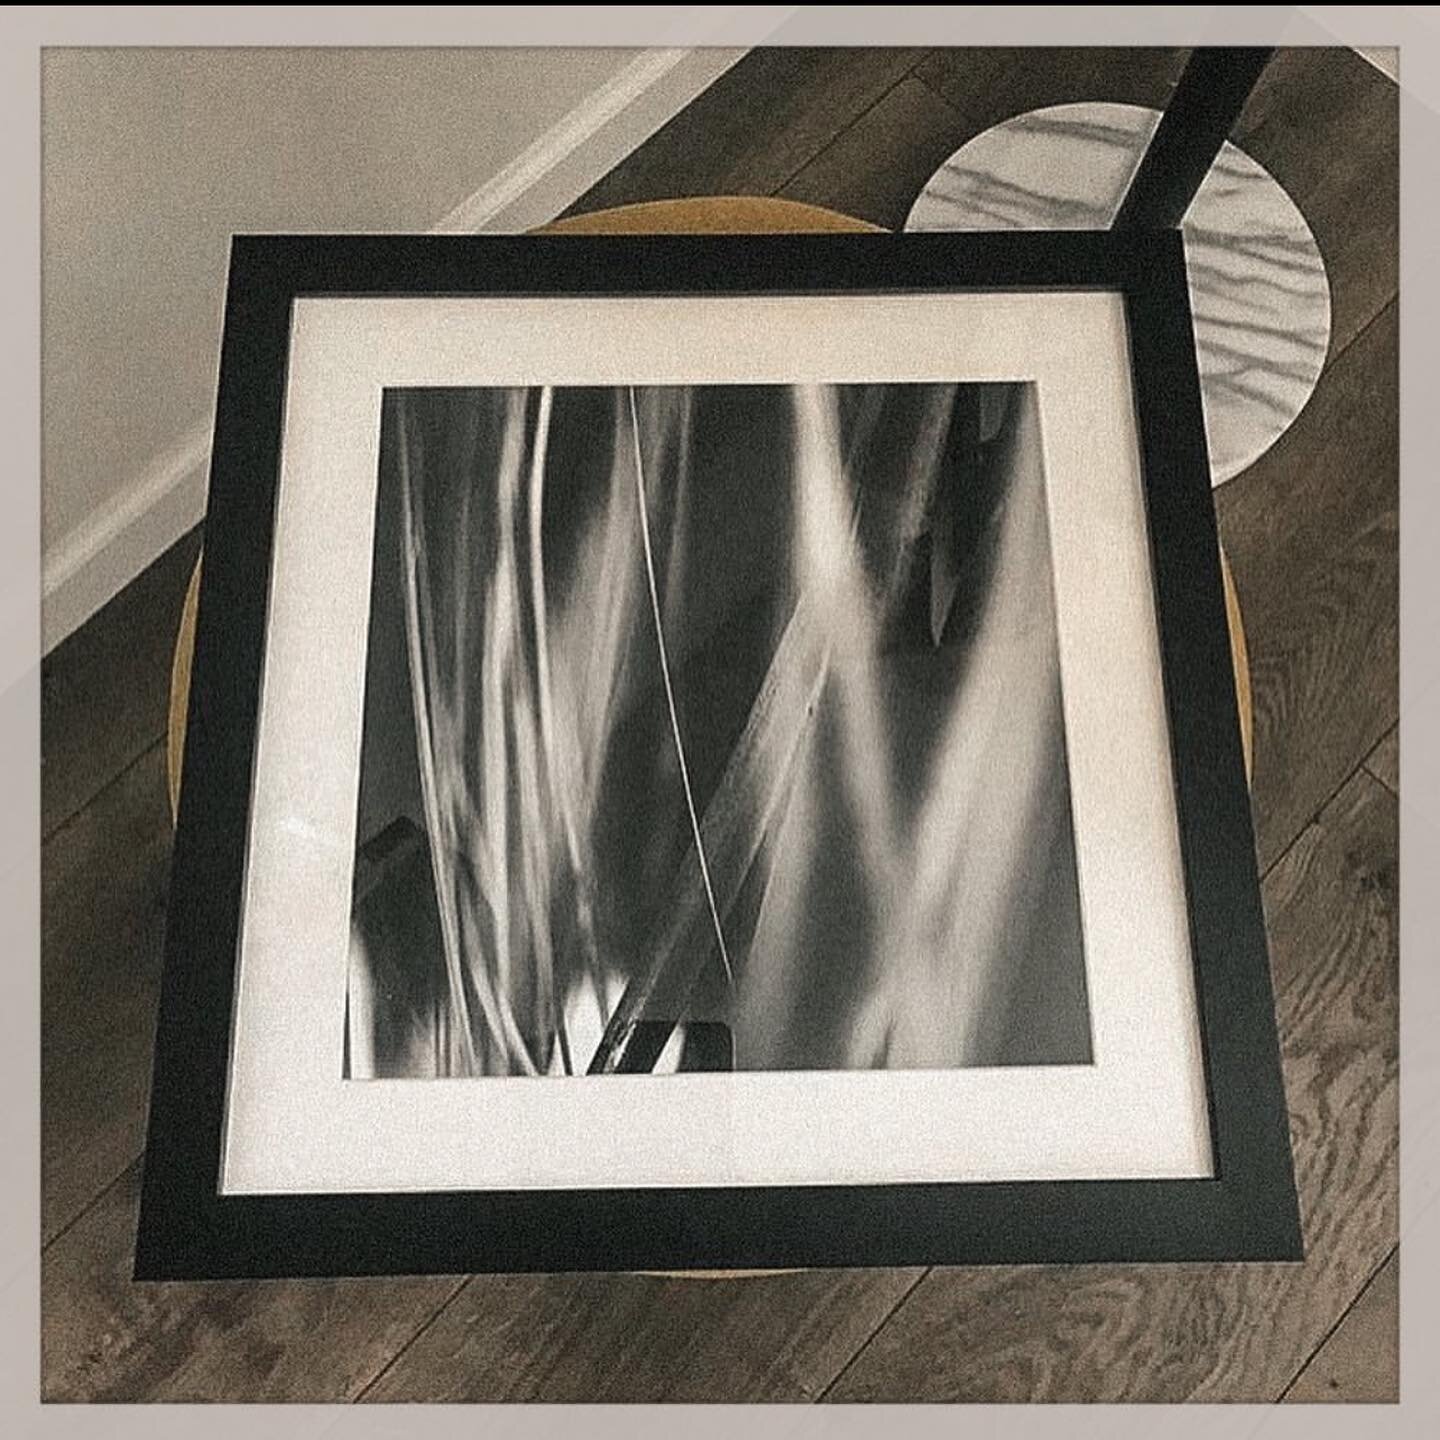 palmleaves003🌴 in 12x12 frames finding their homes  #photoprints #fineartphotography #walldecor